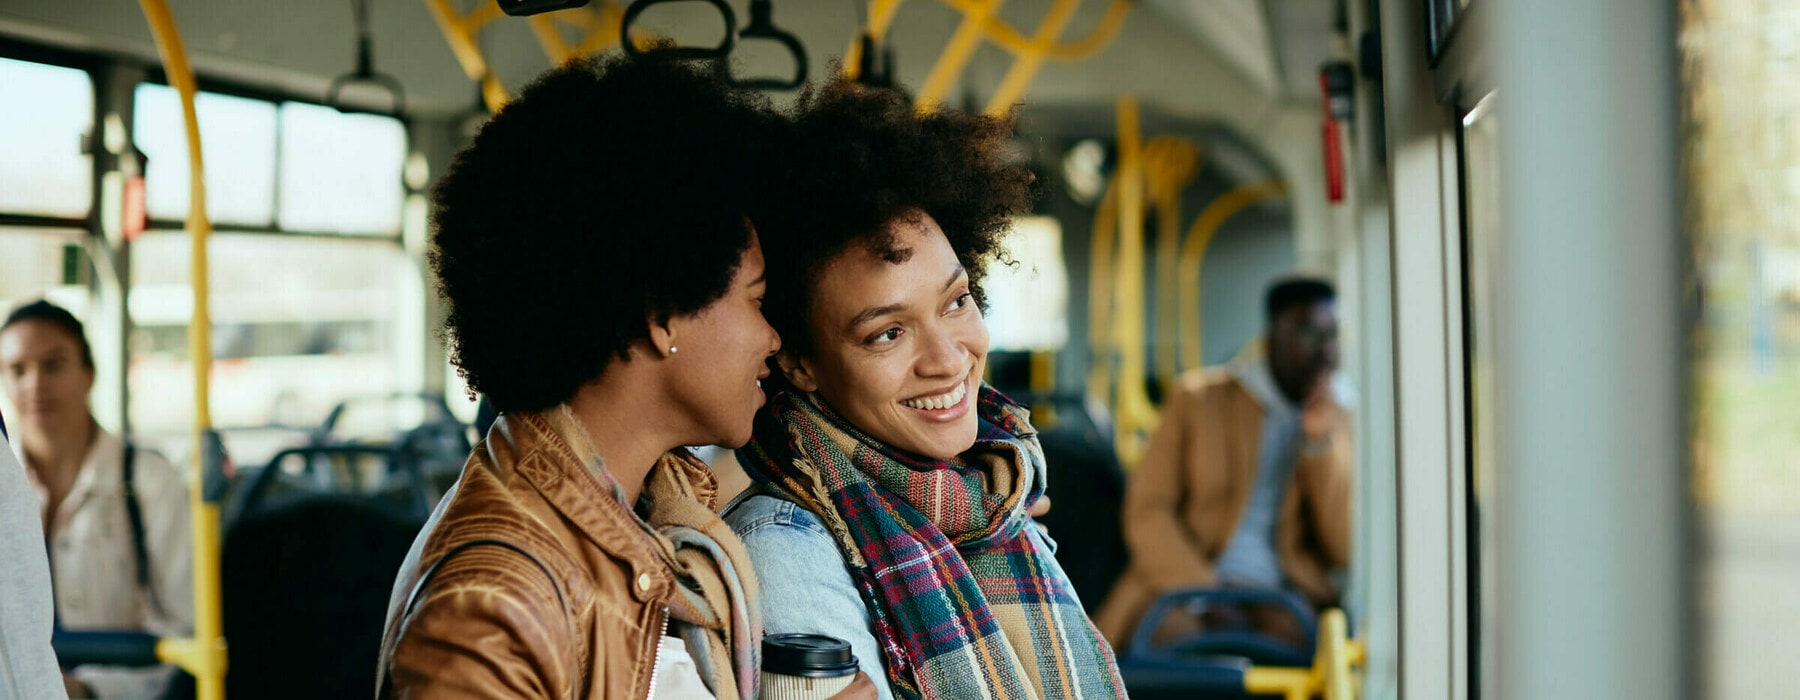 Happy,Black,Woman,Commuting,With,Her,Female,Friend,In,A